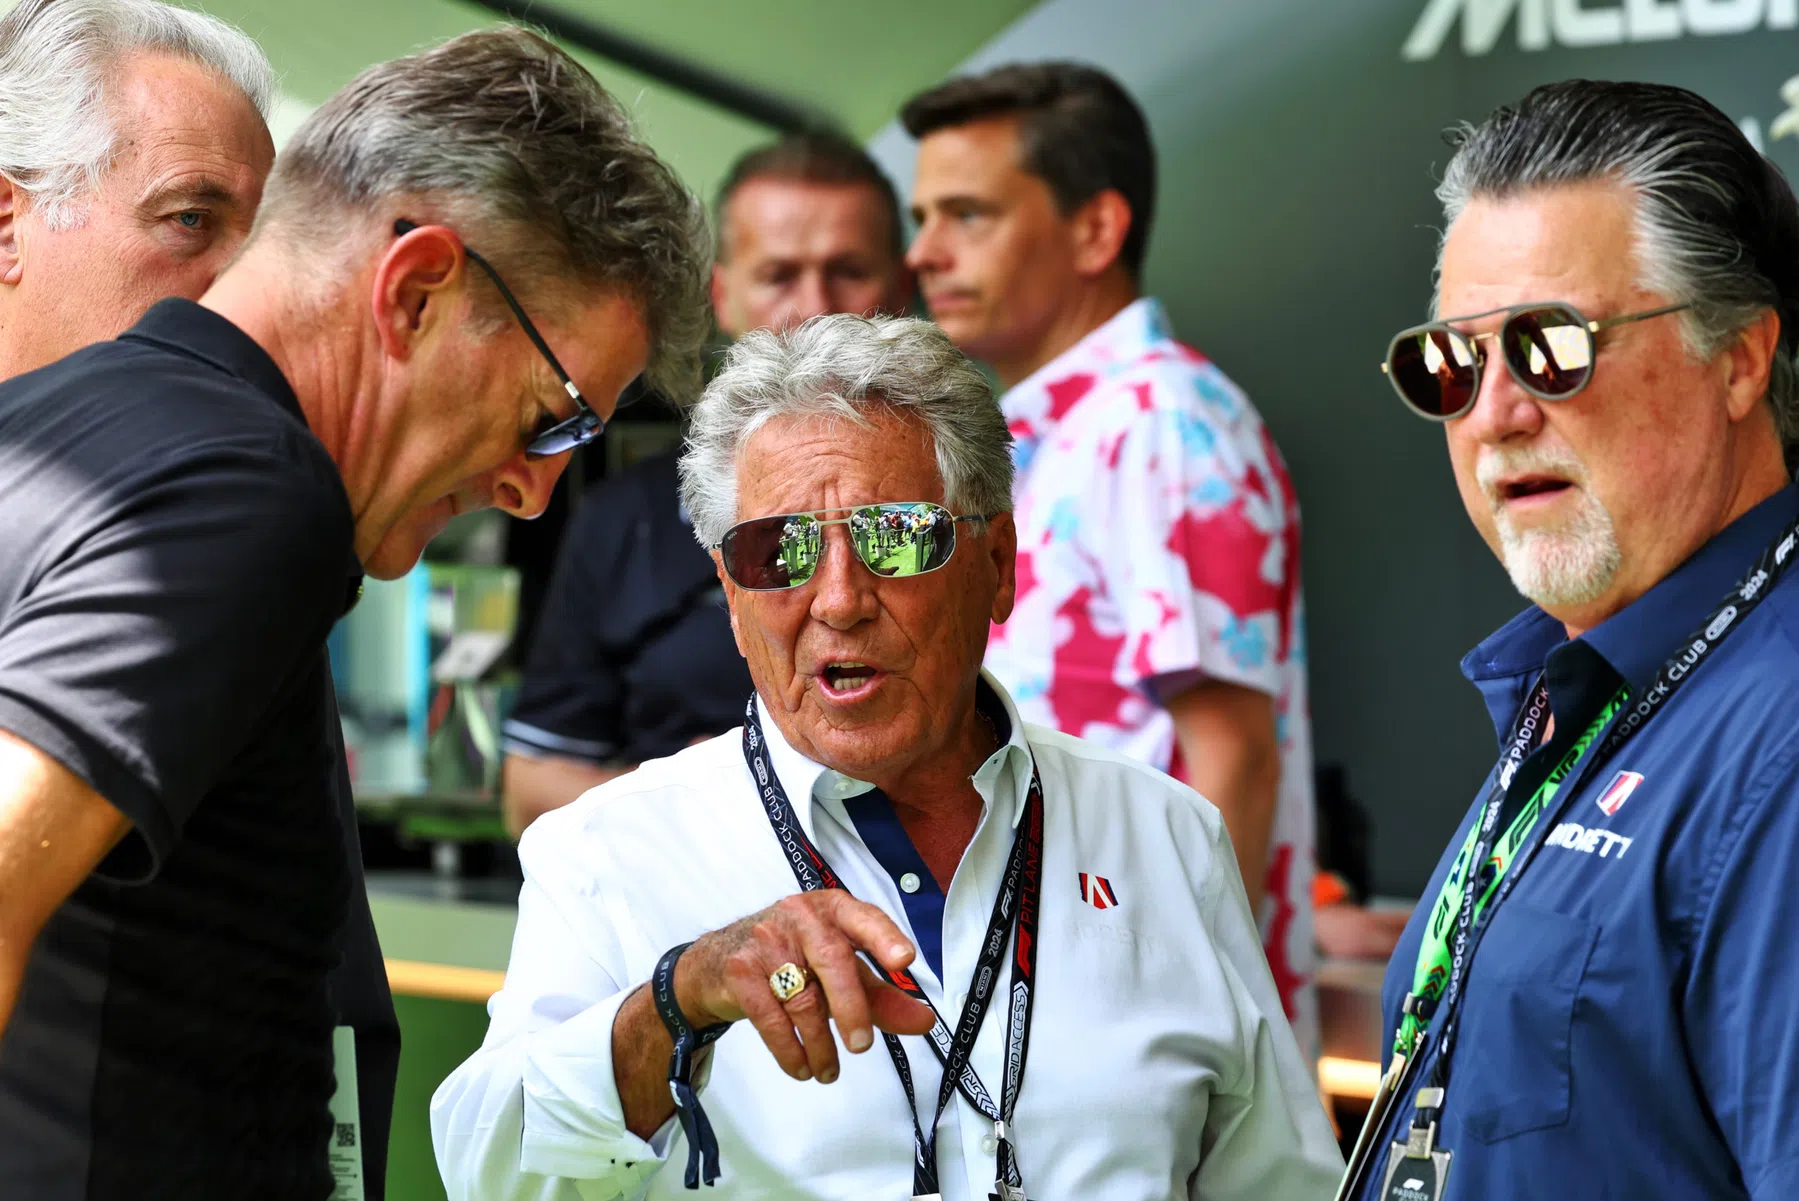 Maffei wants to keep Andretti out of F1 according to Mario Andretti